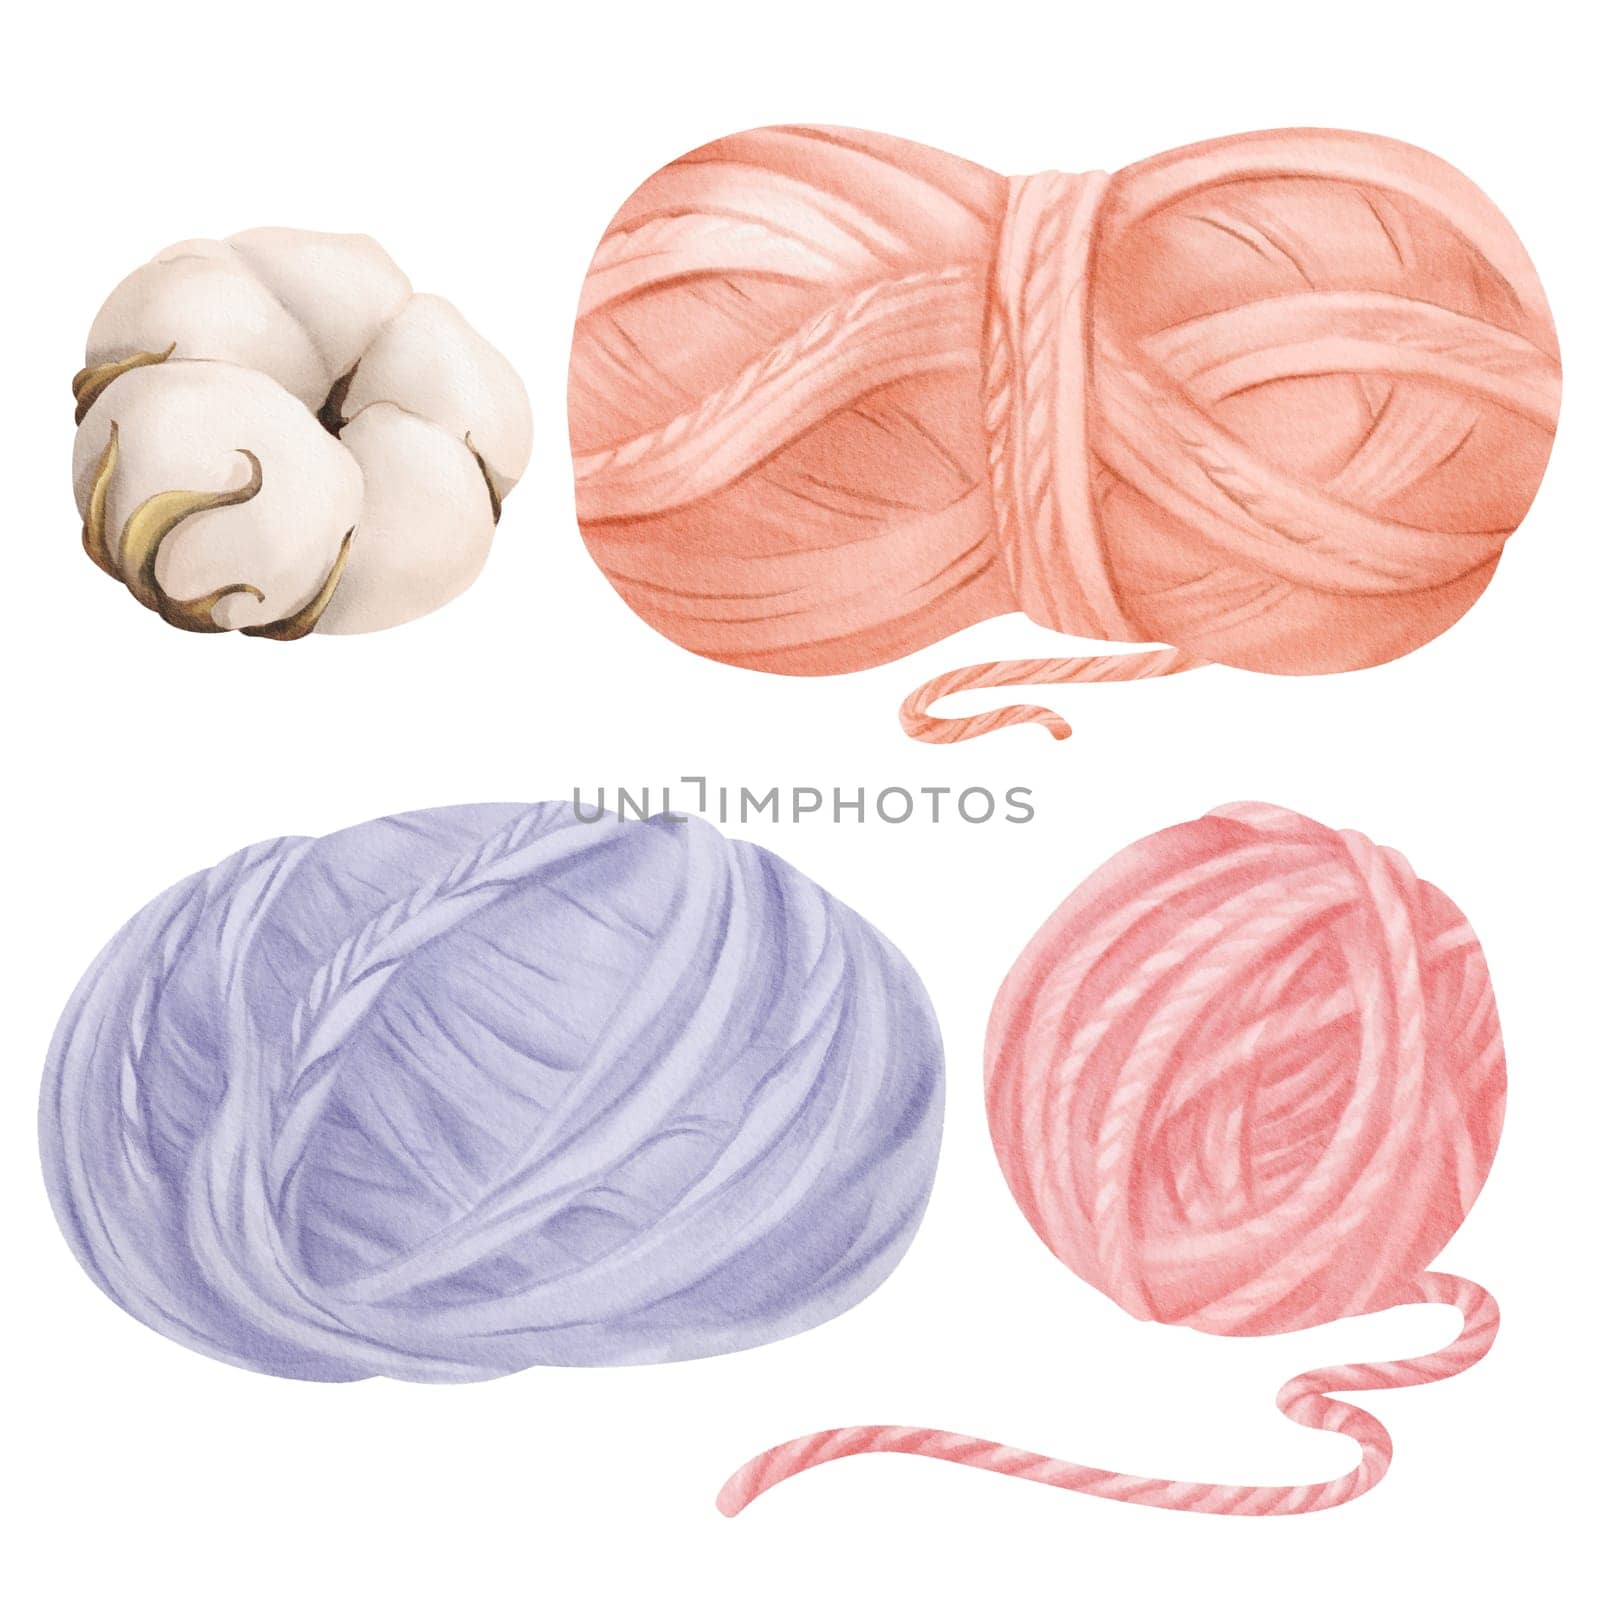 A compilation of watercolor illustrations sewing and knitting elements. balls of wool and cotton threads, a cotton flower. for crafting enthusiasts, sewing or knitting blogs textile illustrations.